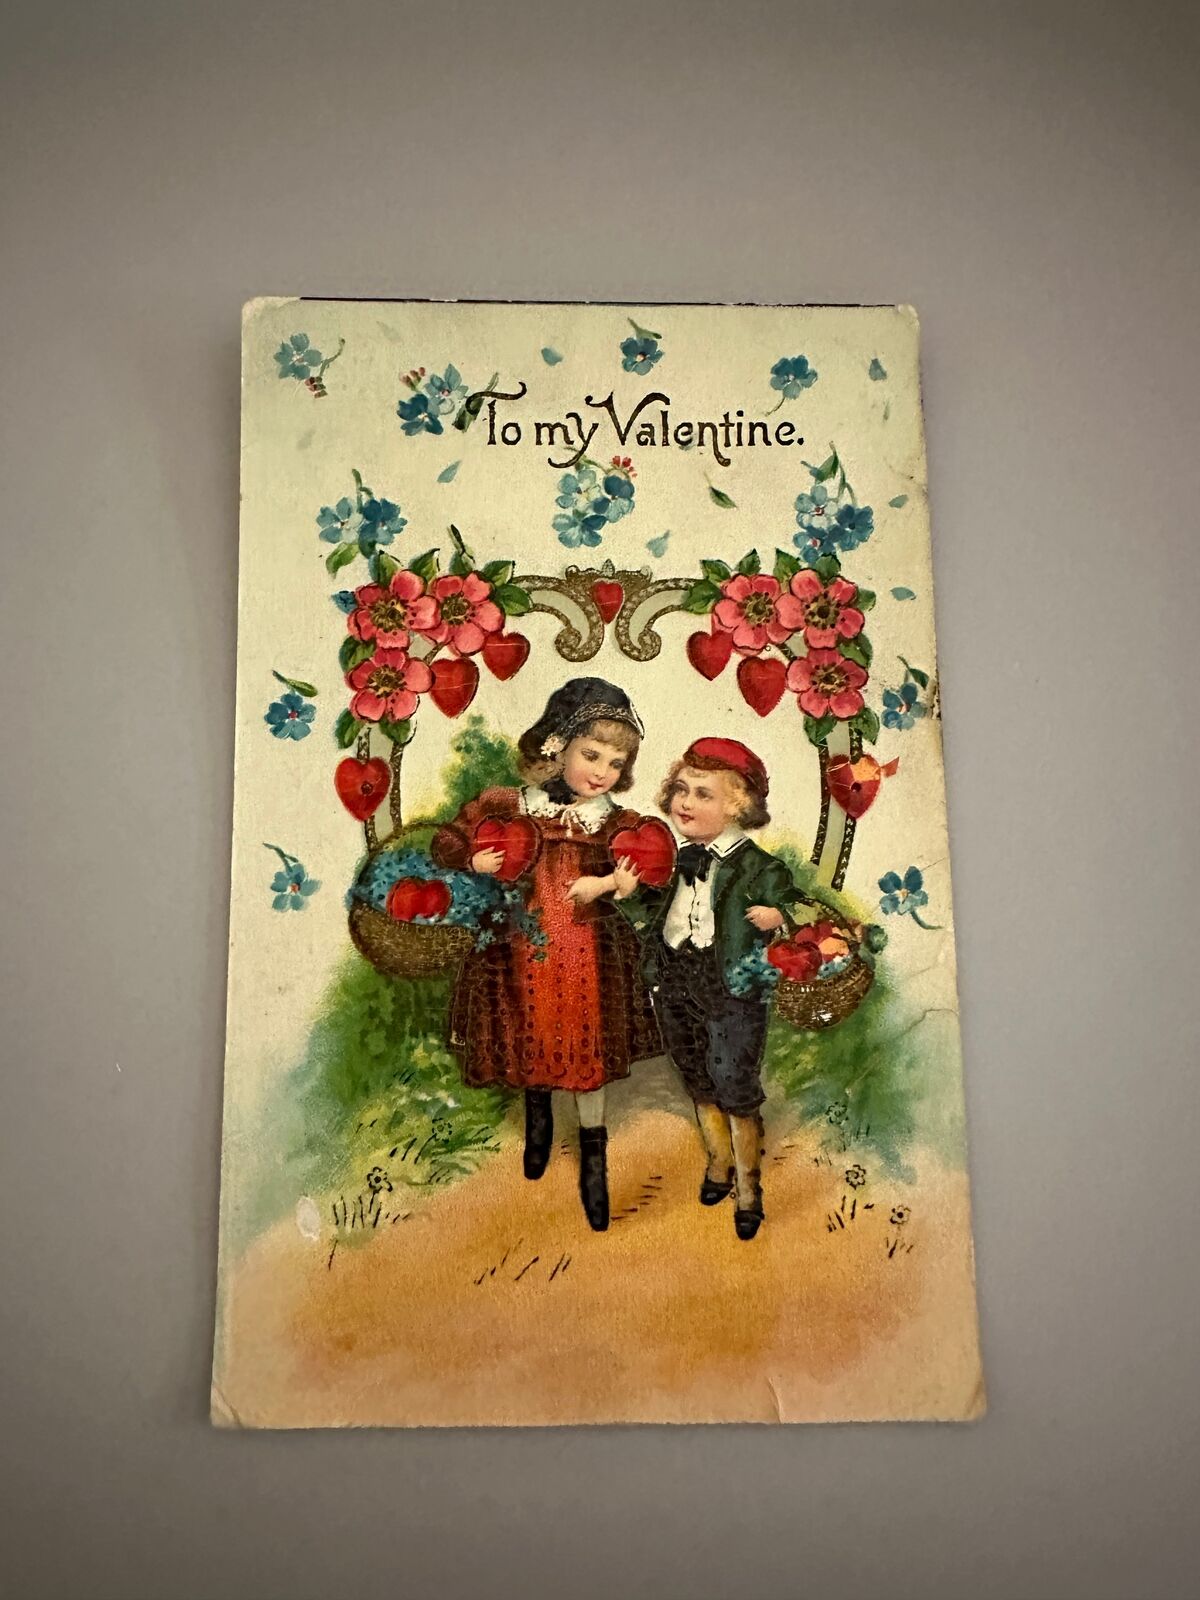 Antique Early 1900’s Postcard - “to my valentine”, made in Germany